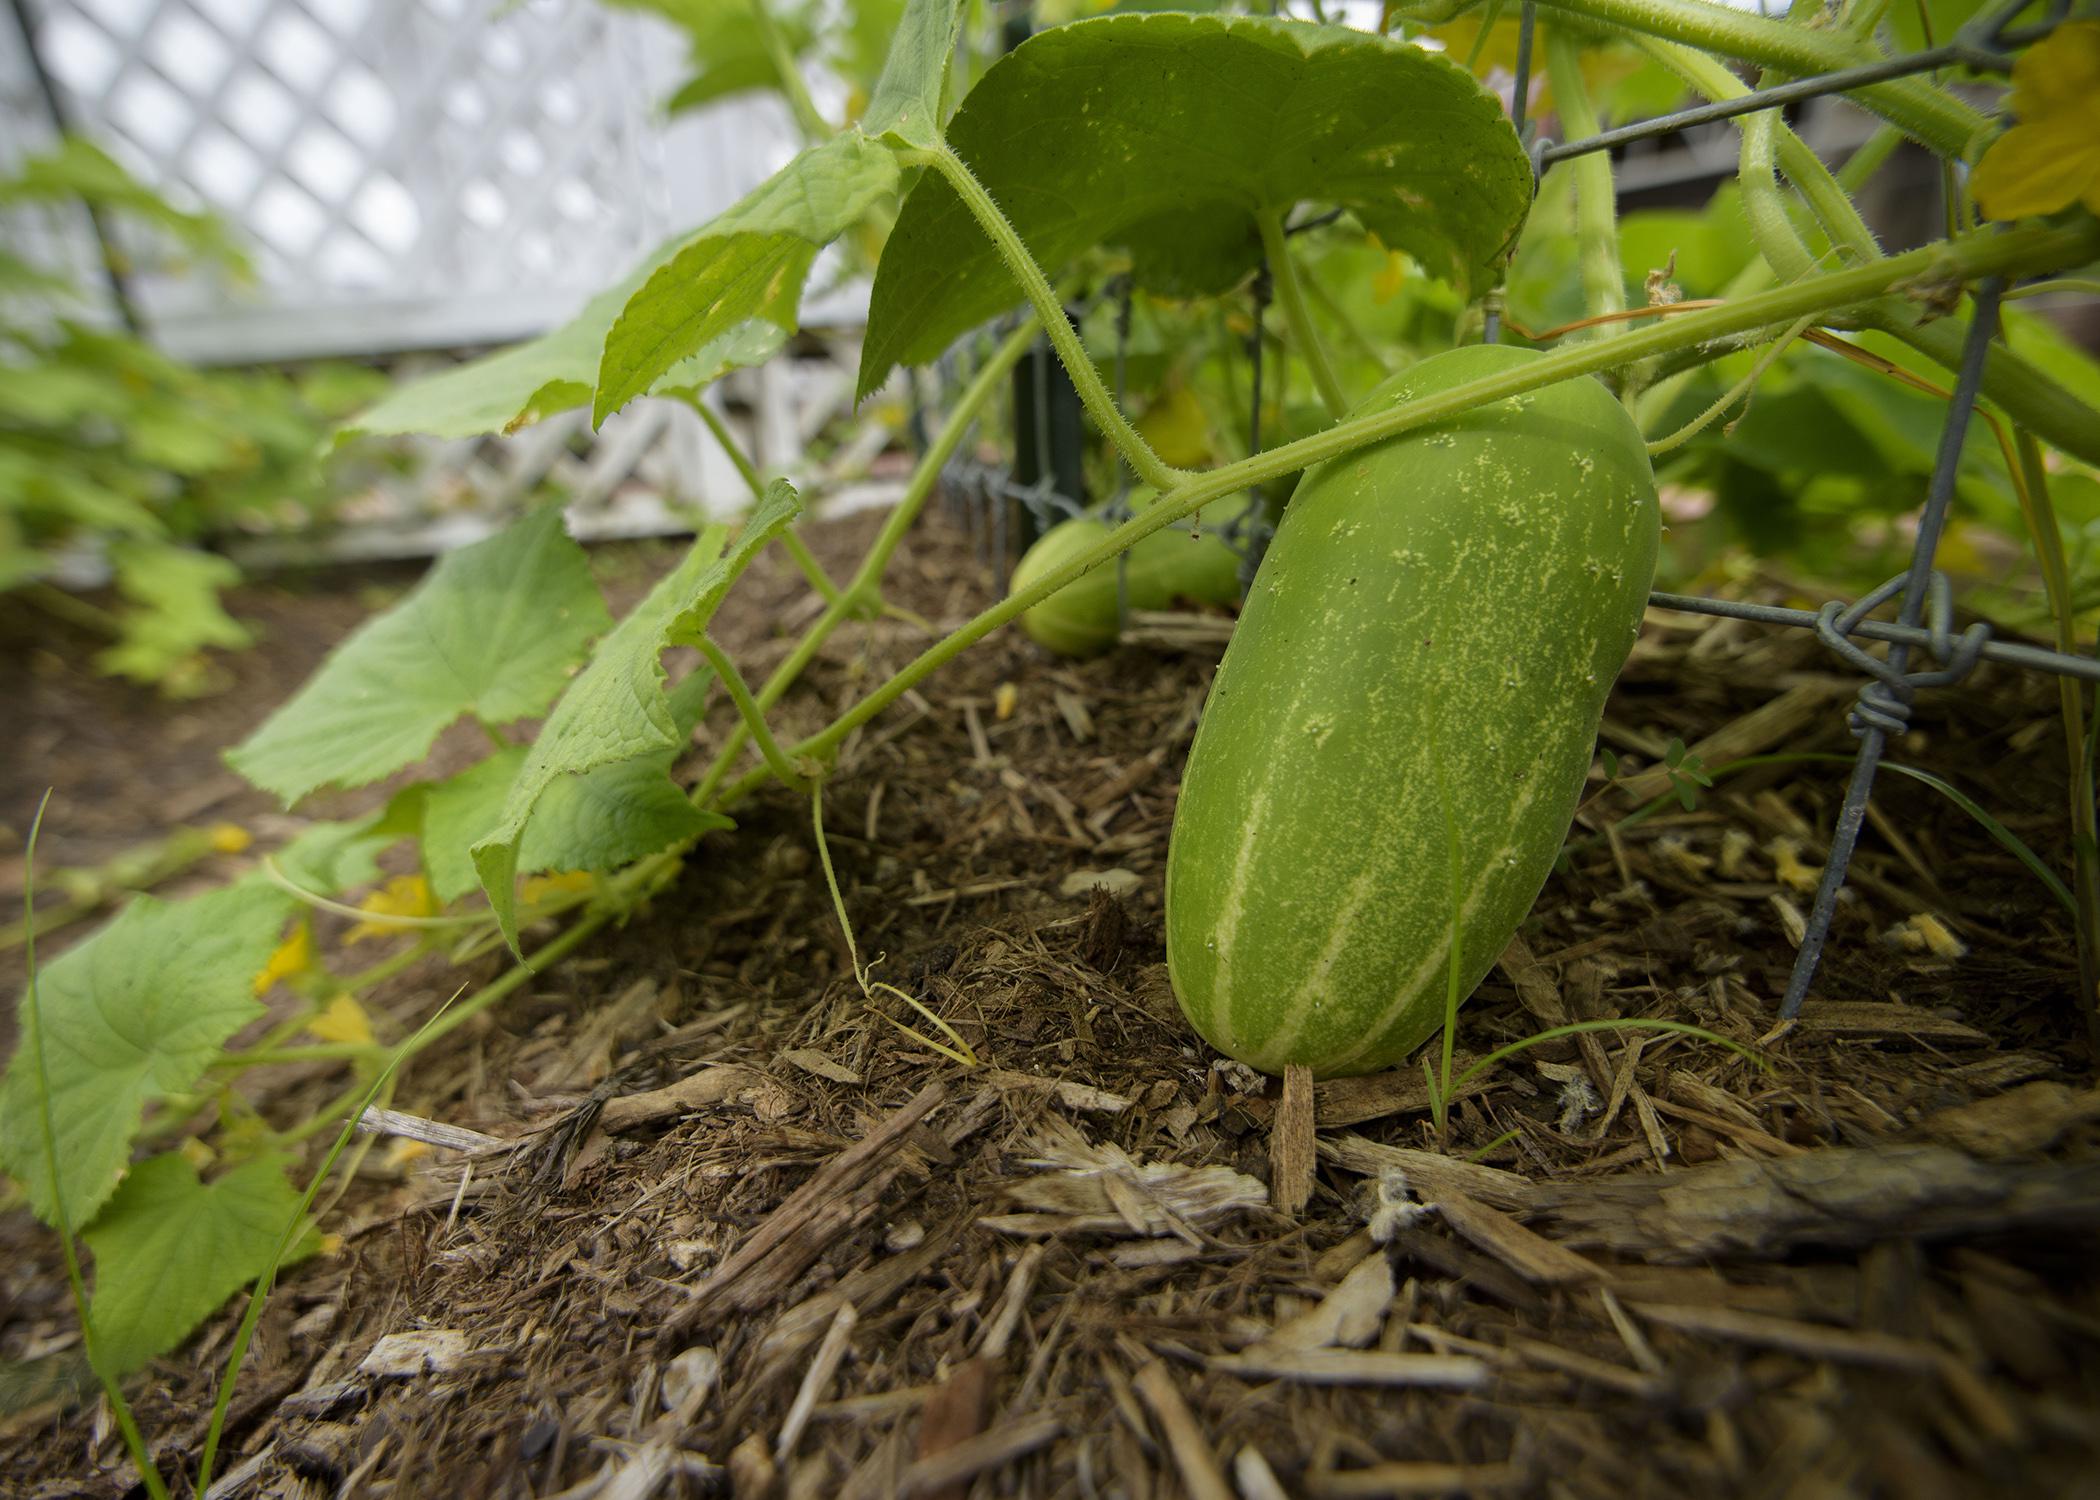 A close-up photo of a green cucumber growing on a vine with another visible in the background.